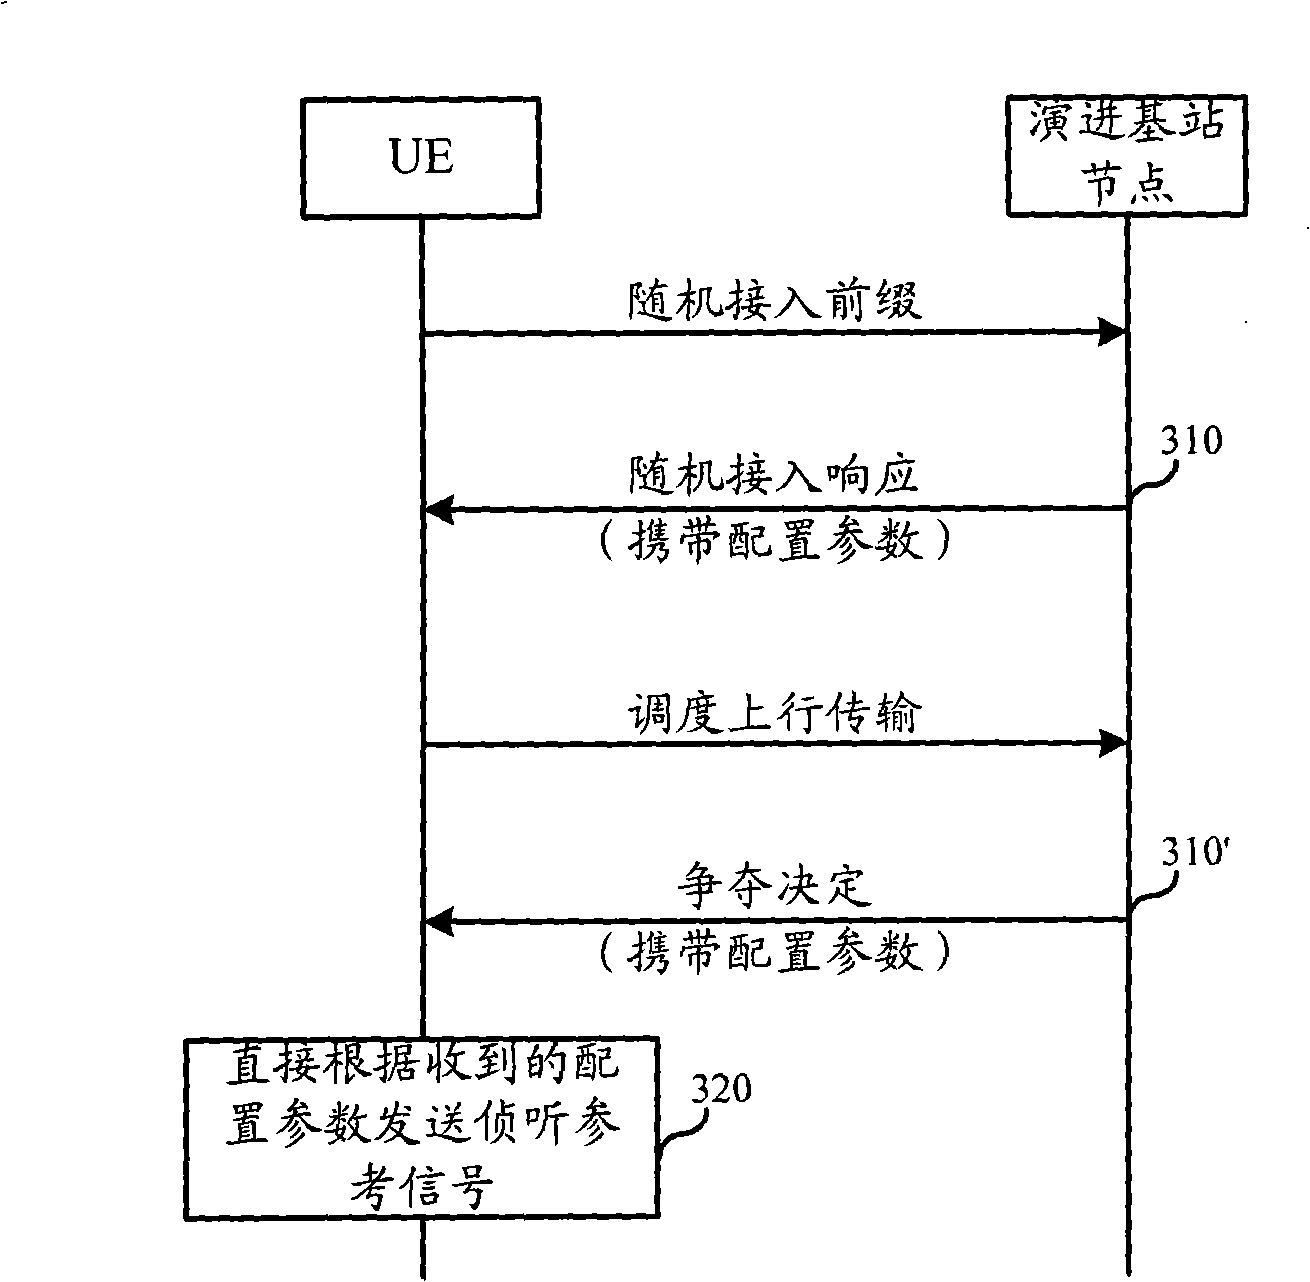 Interception reference signal transmission method and device